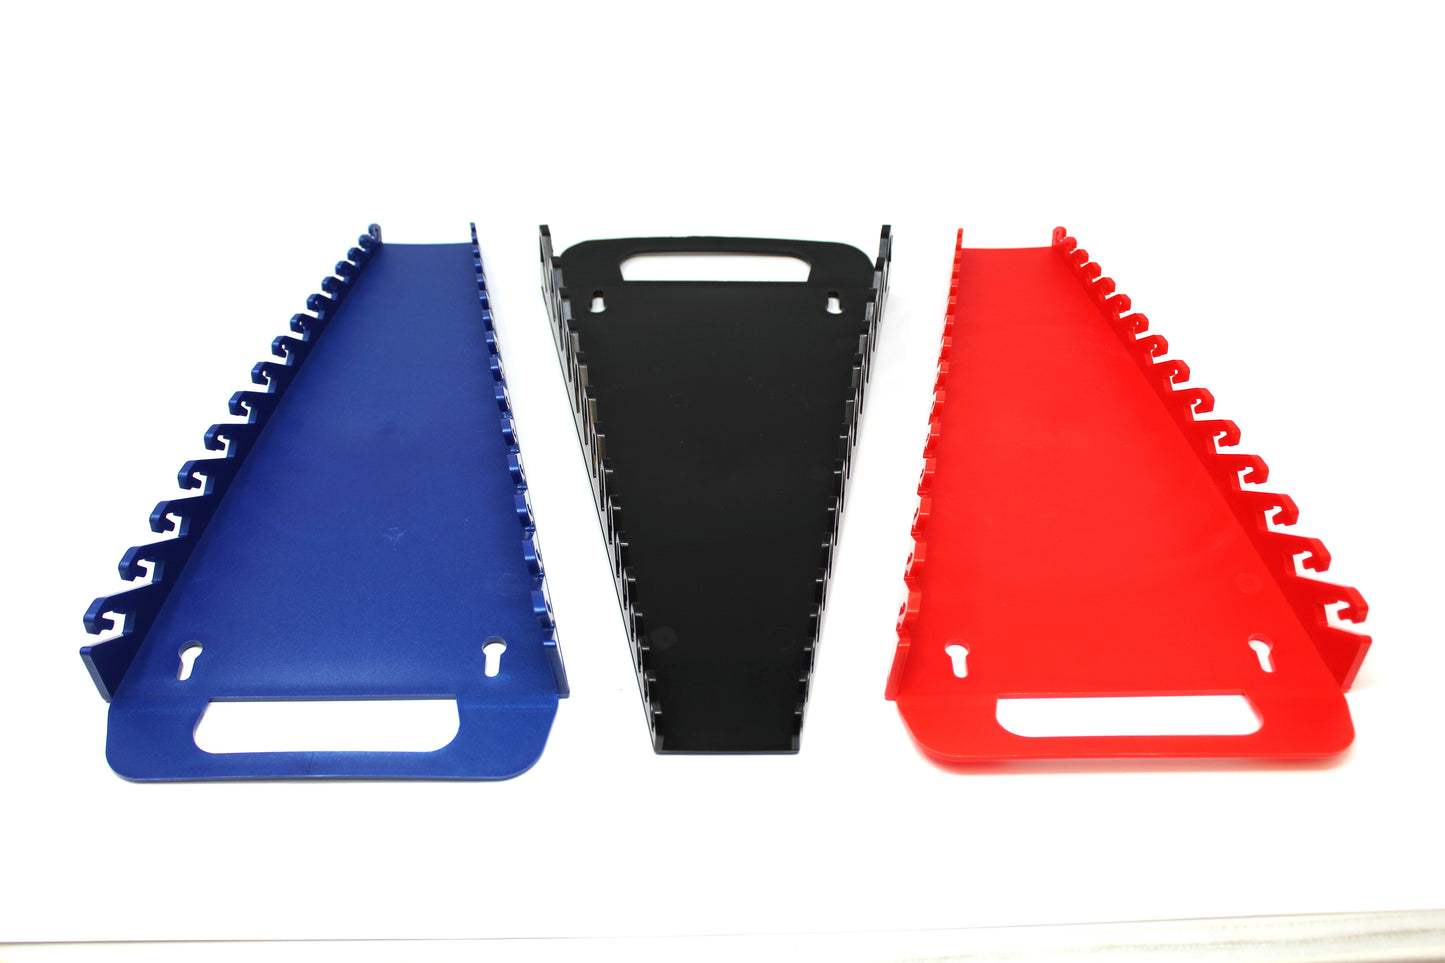 15-Tool Plastic Portable Wrench Gripper Organizer Holder Tool Tray -Multi Color